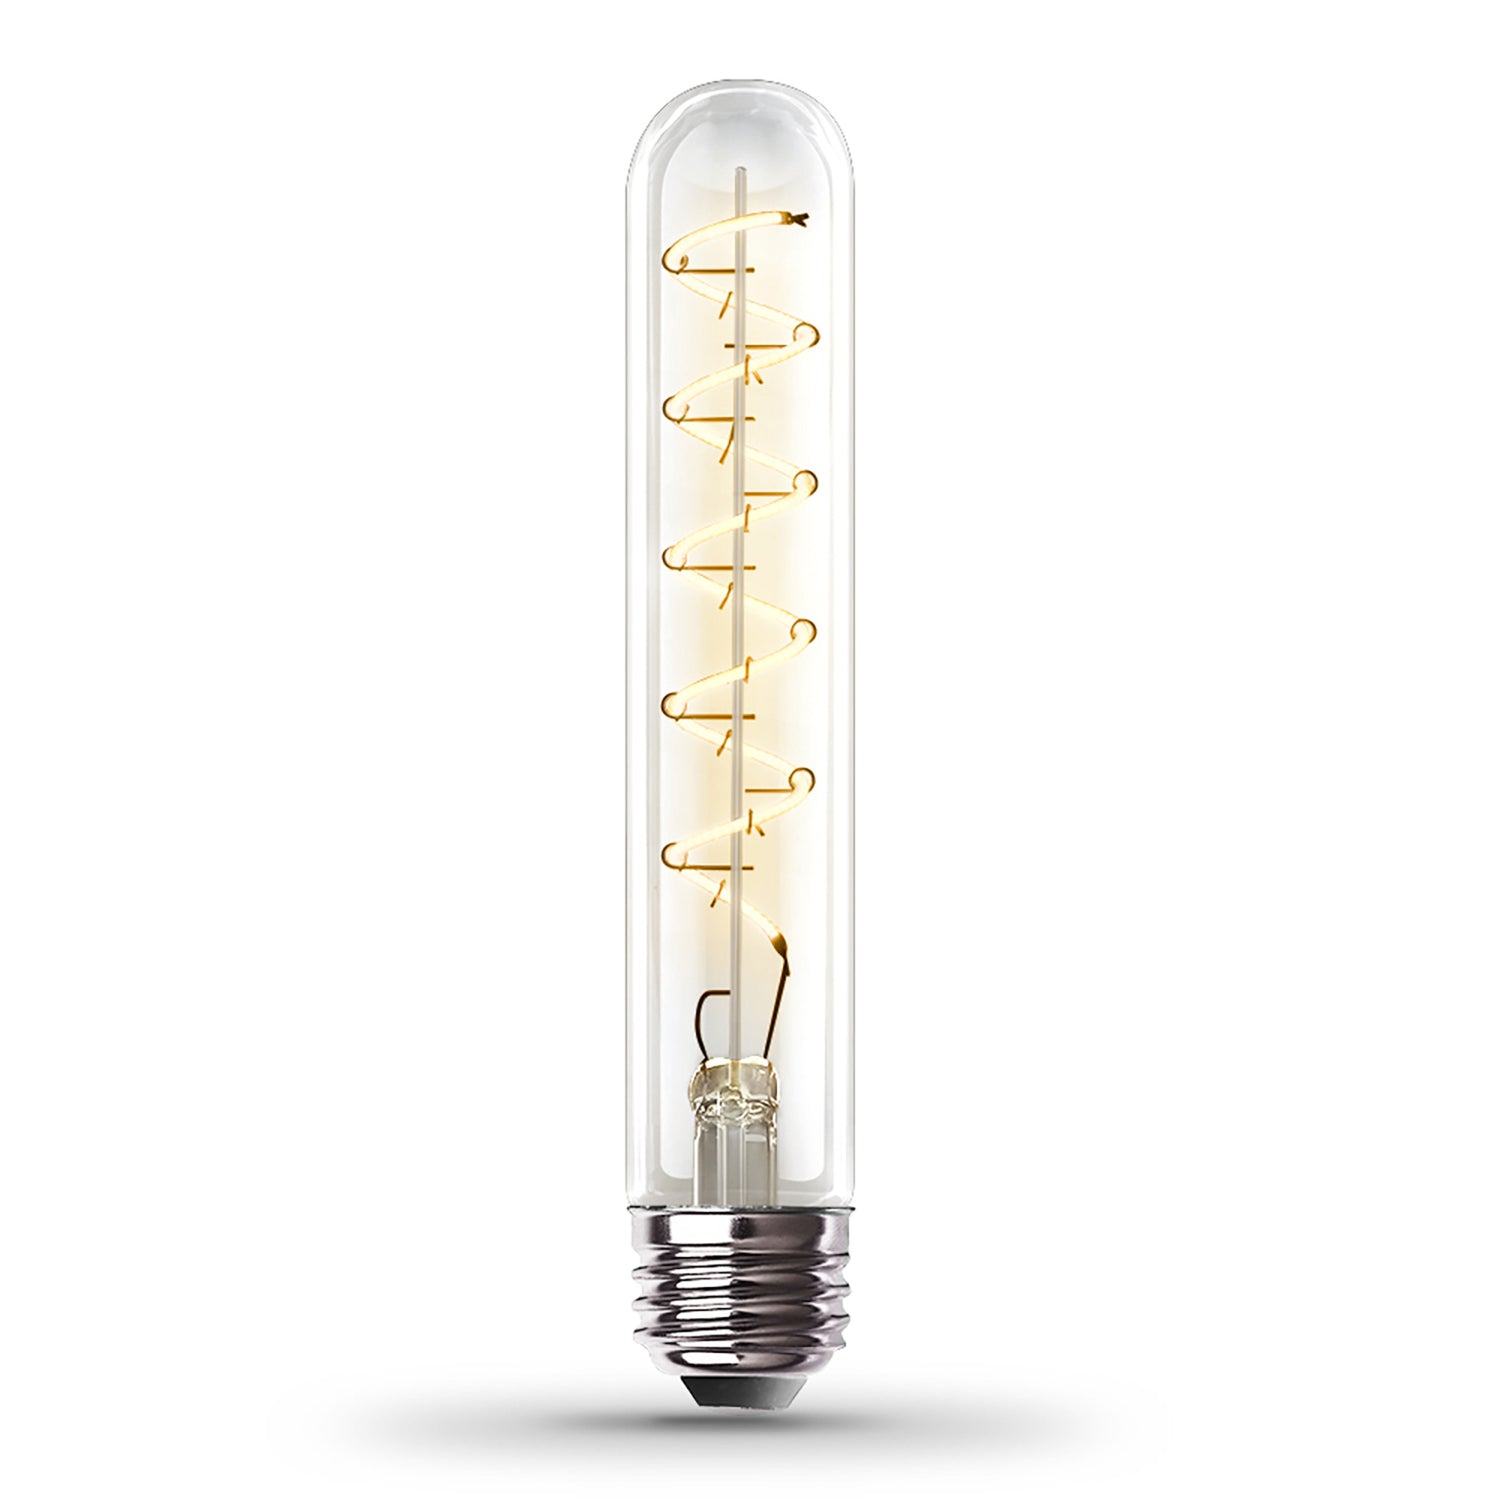 4.5W (25W Replacement) T10 E26 Dimmable Spiral Filament Clear Glass Vintage Edison LED Light Bulb, Warm Light